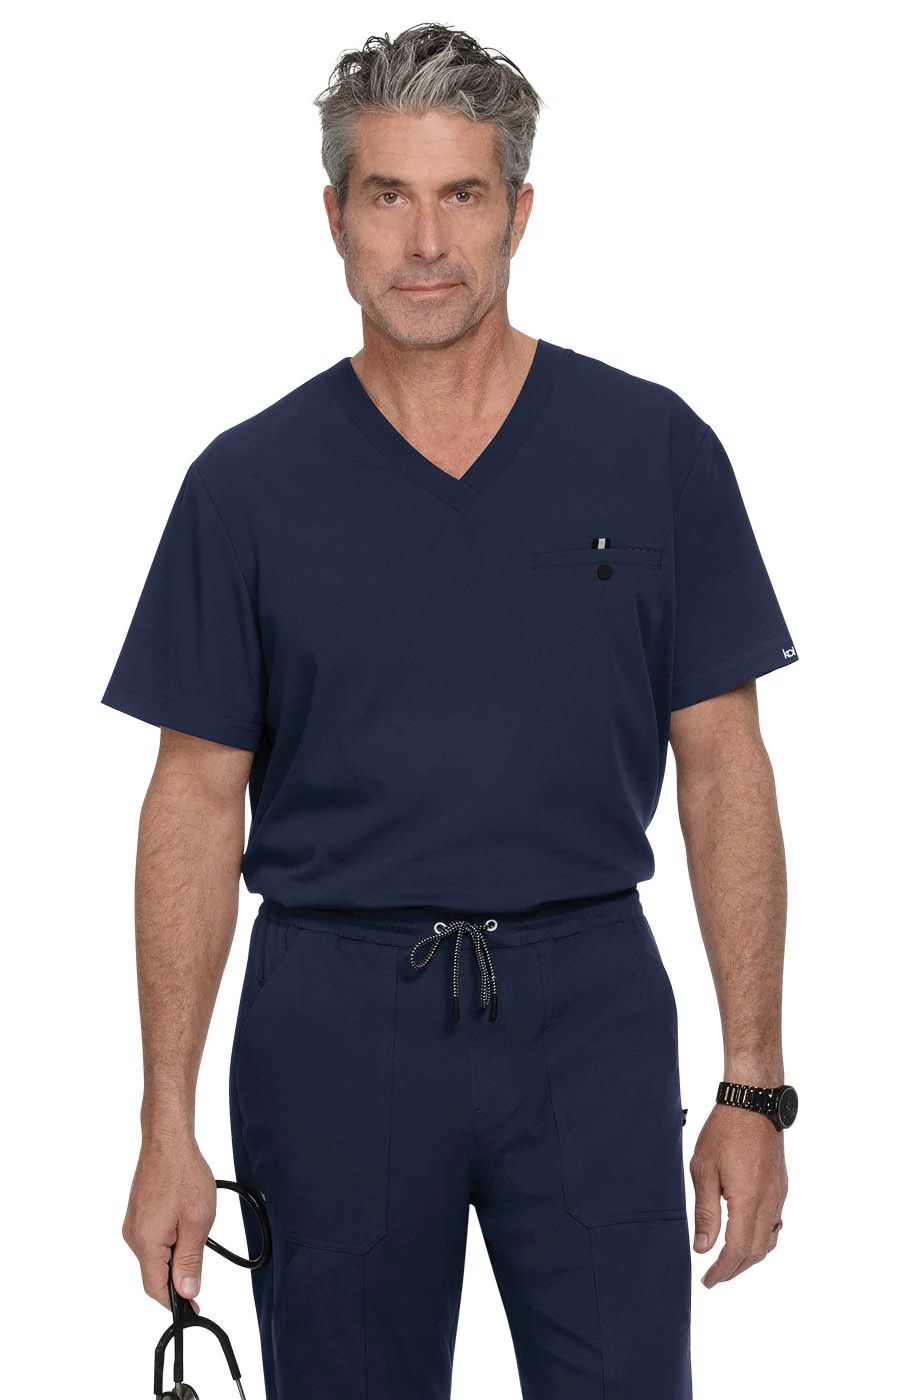 on-call-top-navy